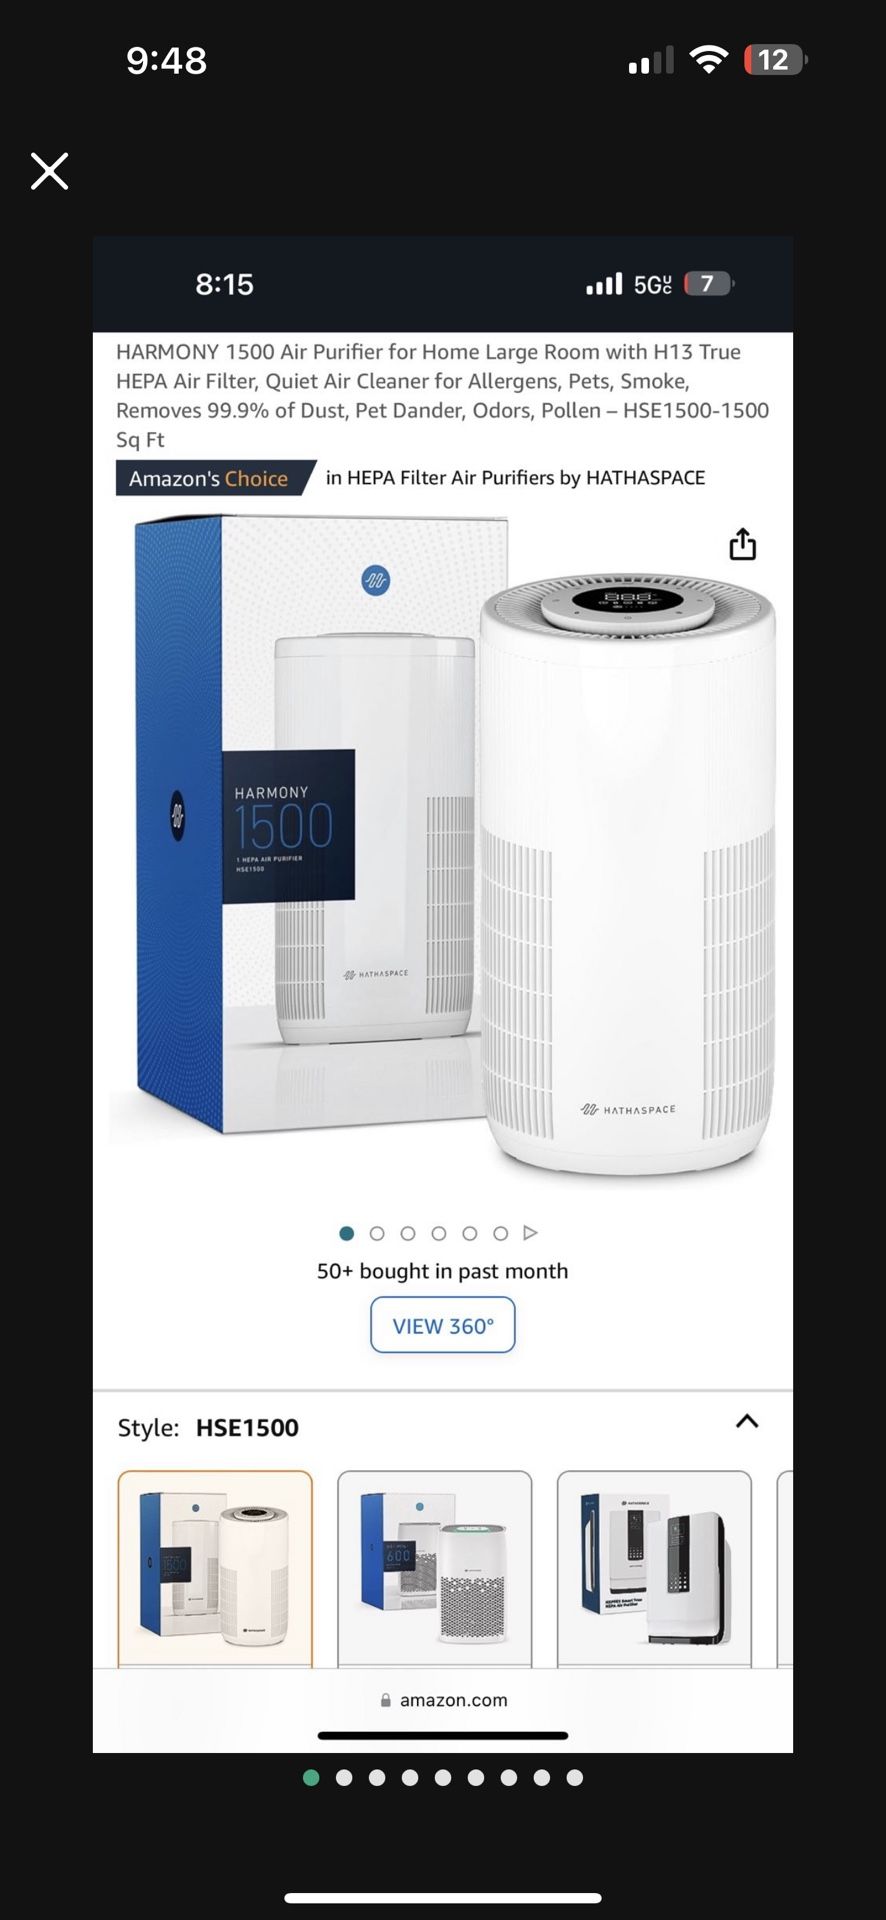 Hathaspace Harmony 1500 Air Purifier With H13 True Hepa Air Filter New In Box.